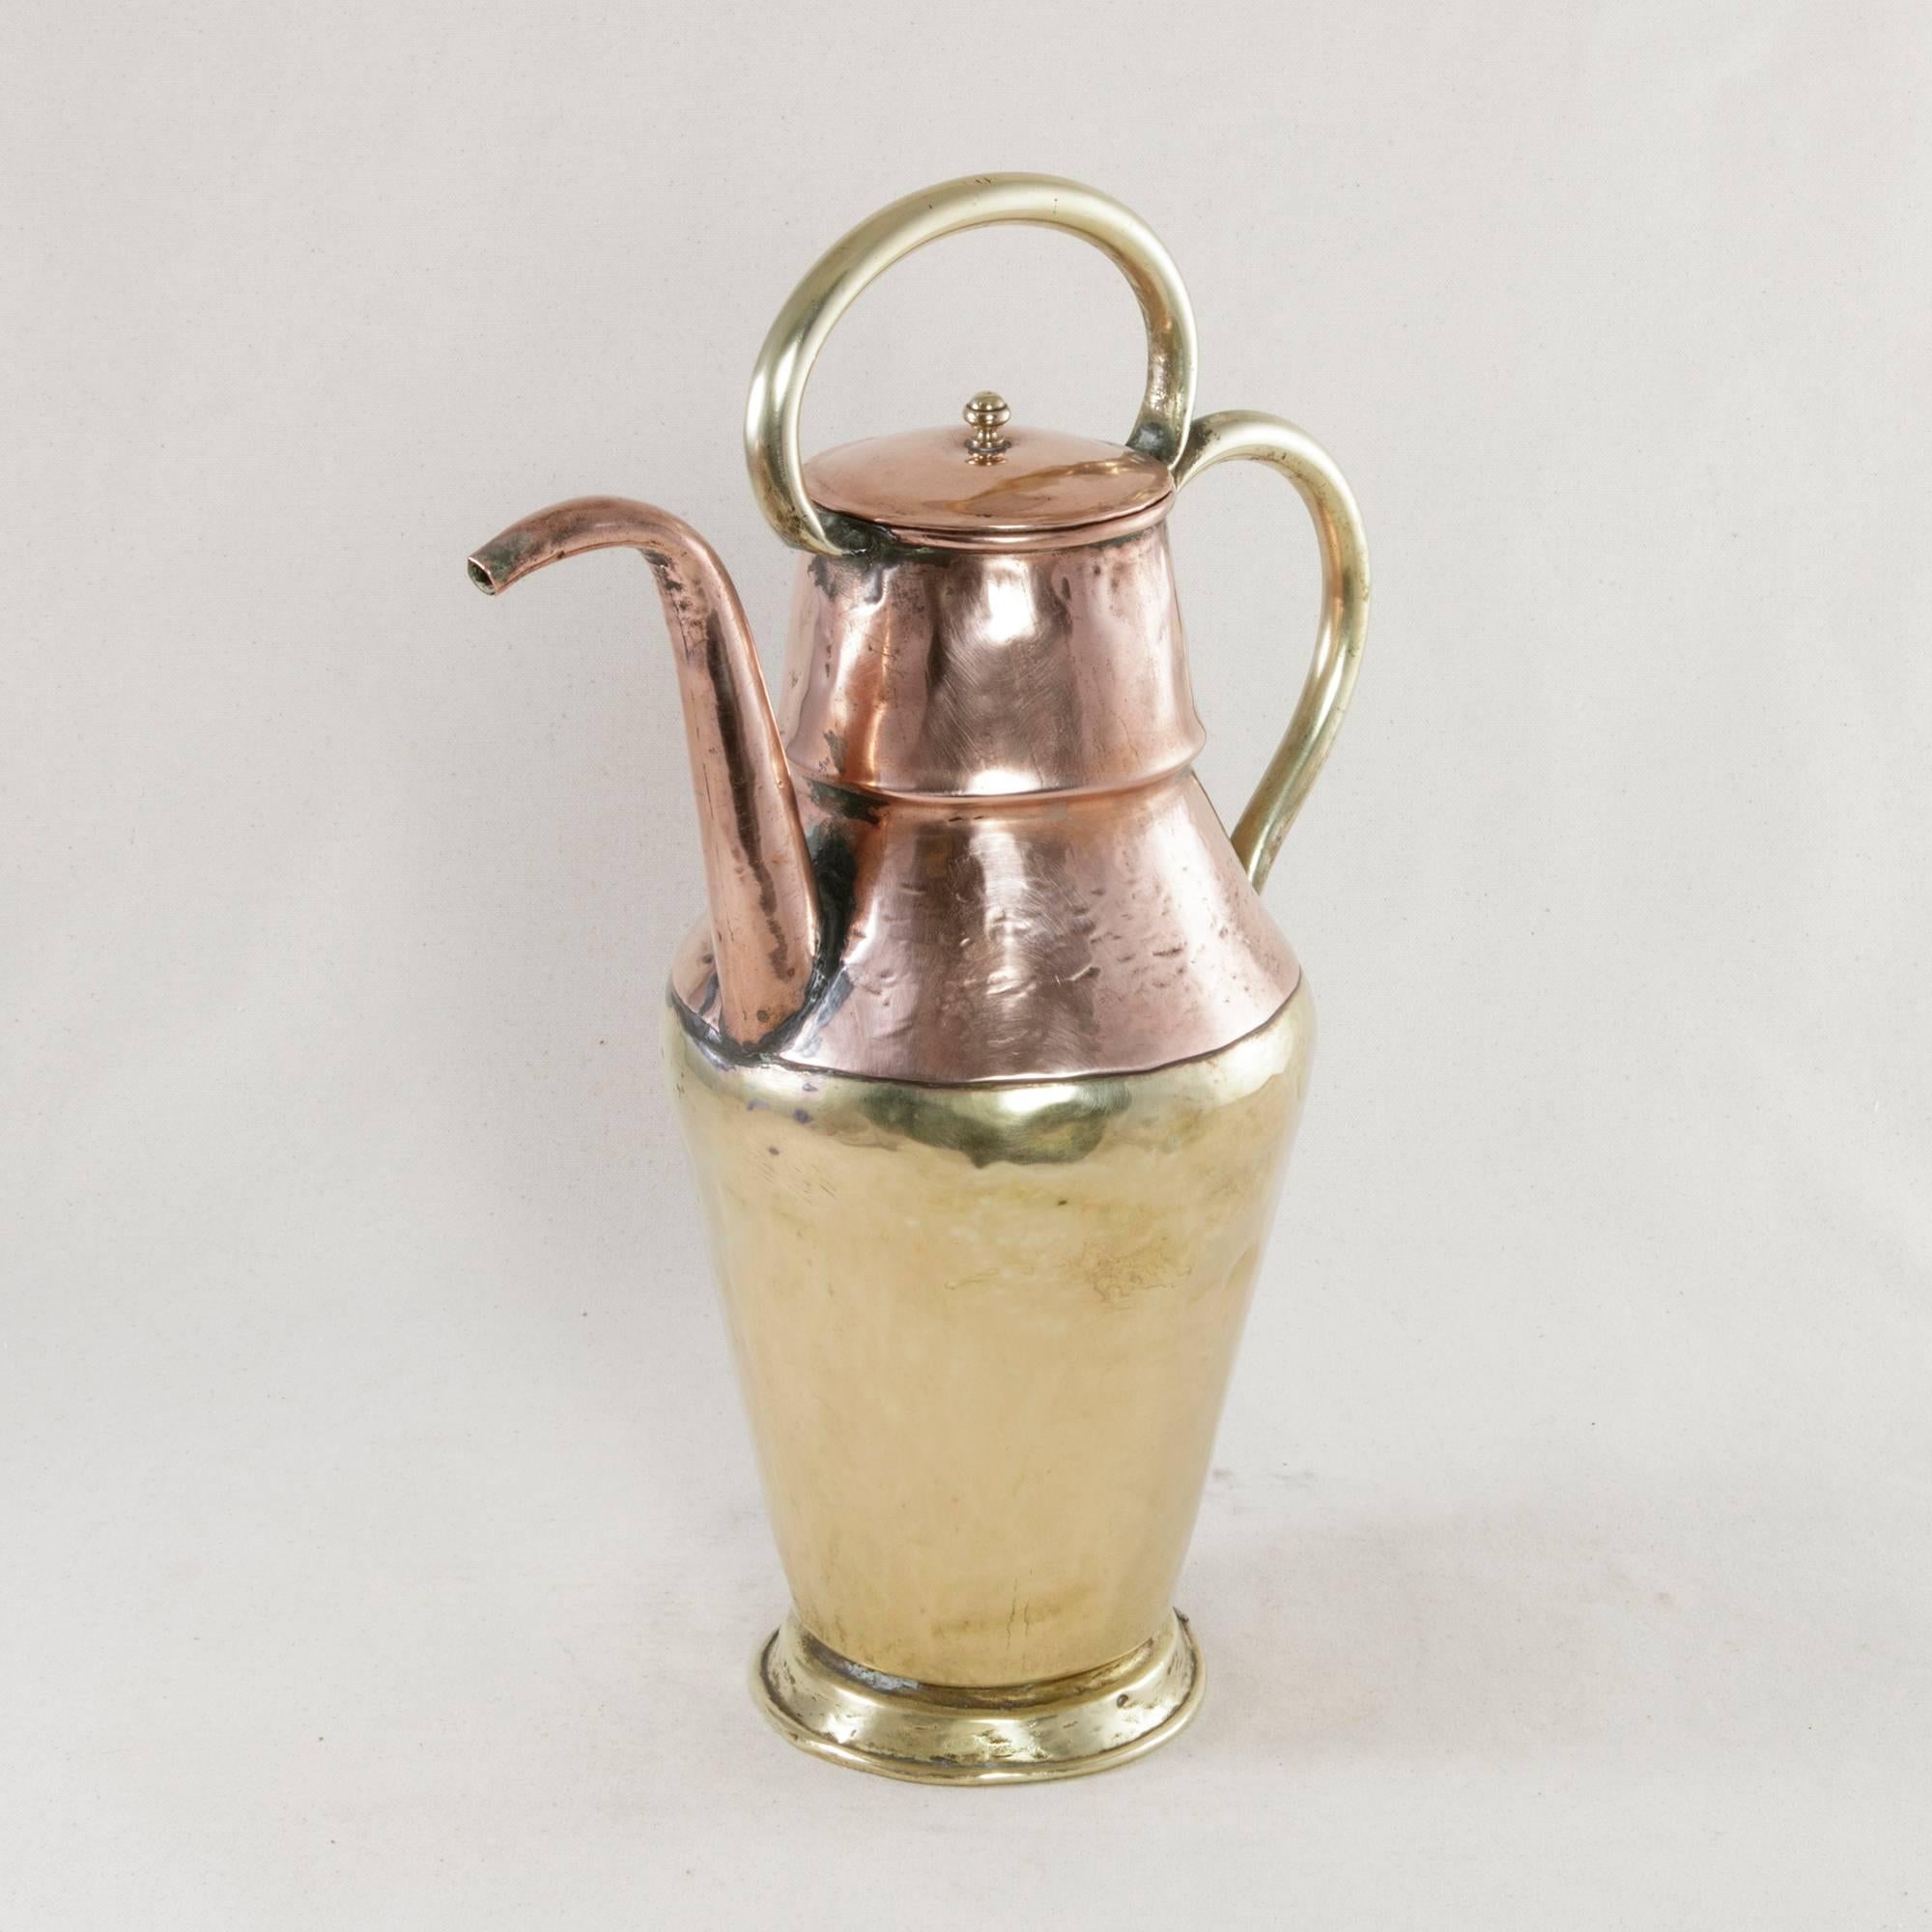 Taking the form of a Moorish teapot, this 19th century French piece features a stunning mixture of copper and brass. Its hand-hammered upper half has a copper spout and lid and two graceful brass handles. Evidence of its age is in the visible seam